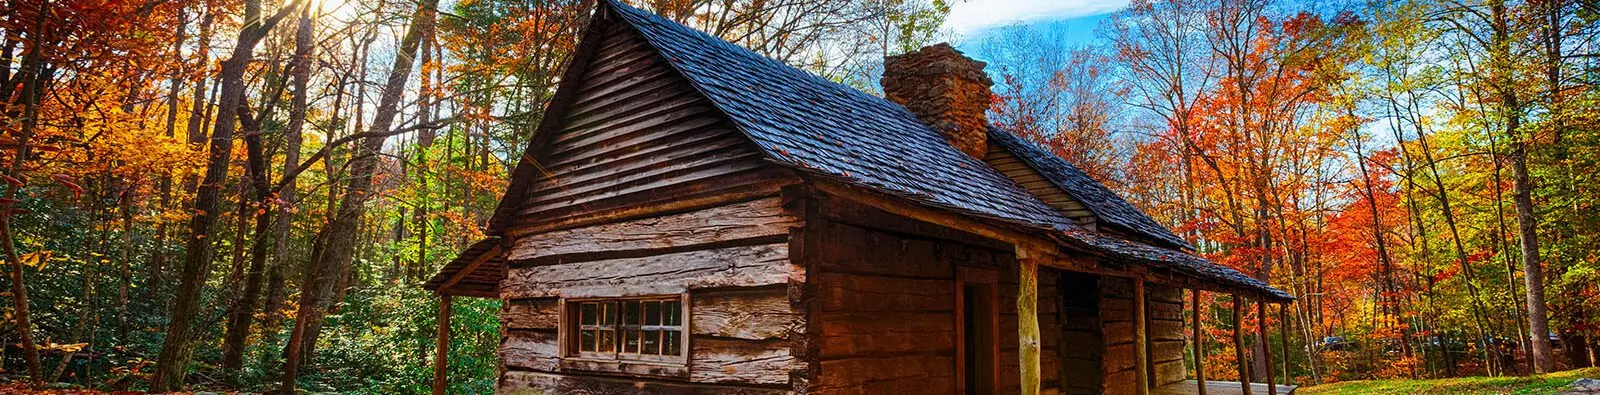 Historic pioneer cabin in Great Smoky Mountains National Park